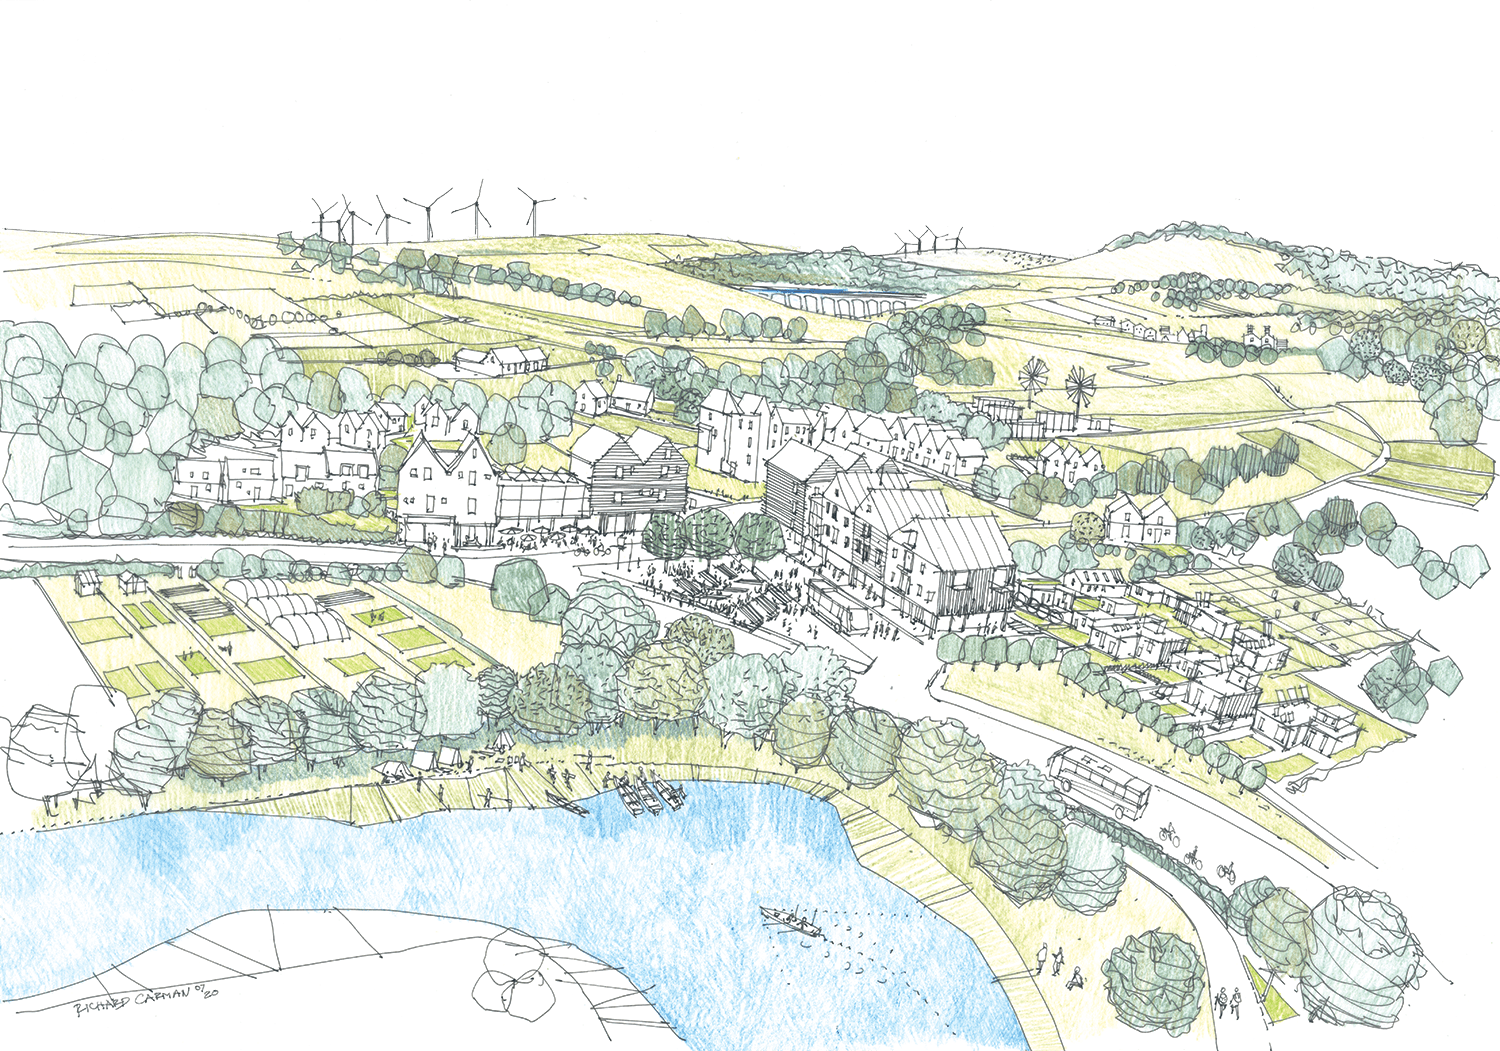 A pencil illustration birds-eye view of a rural community along a river, showing green fields, and a cluster of buildings.